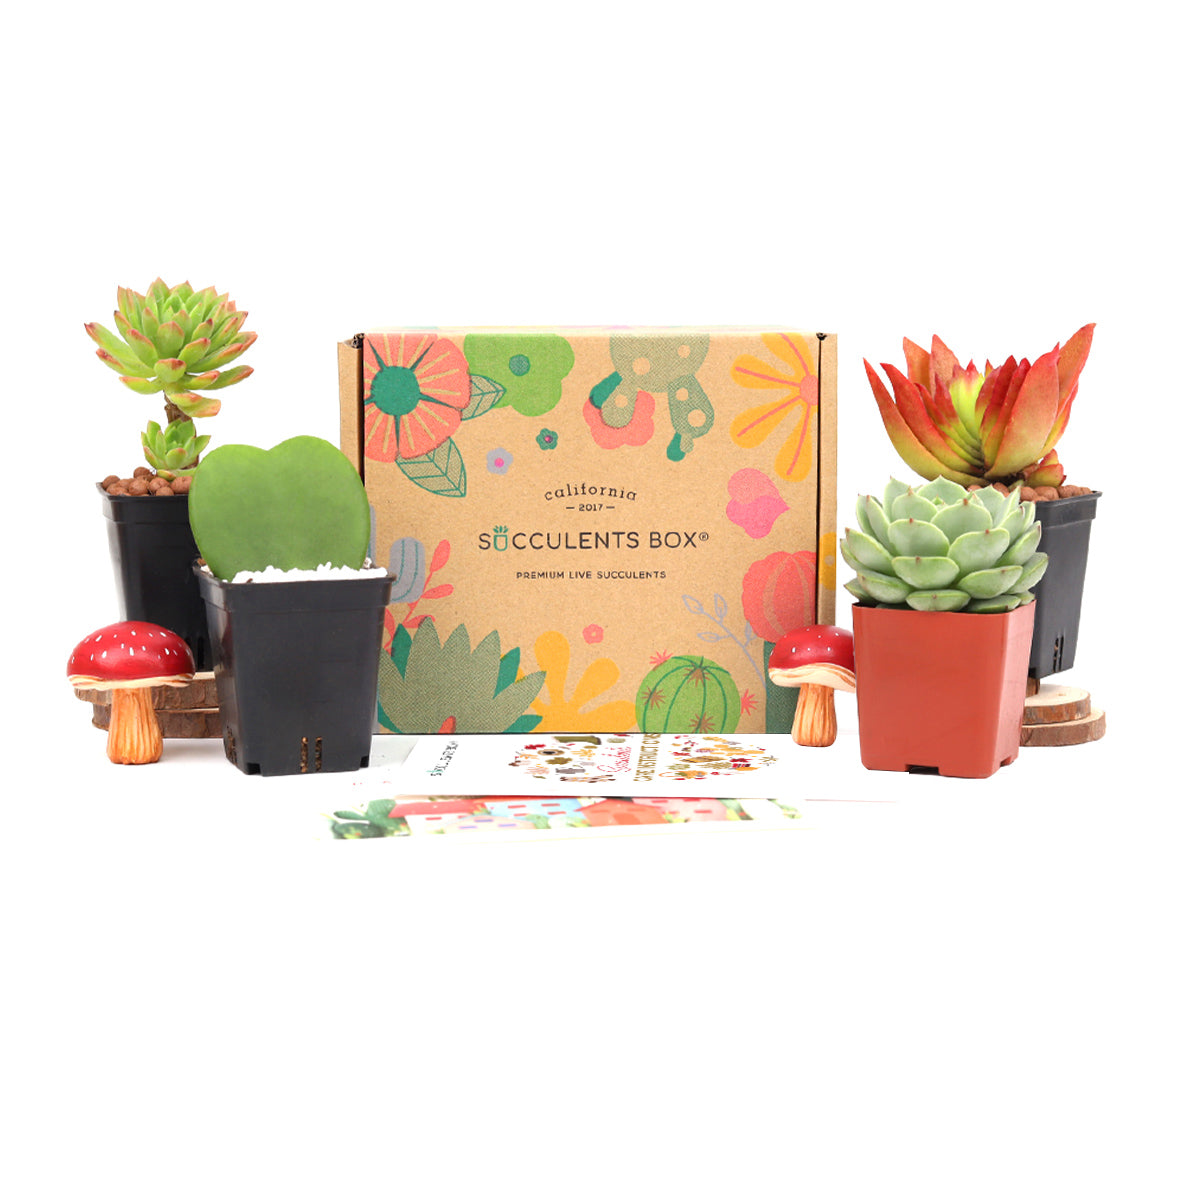 subscription box gift, gift subscription box, gift box subscription, subscription box gift ideas, subscription gift box, Succulent subscription box delivered monthly